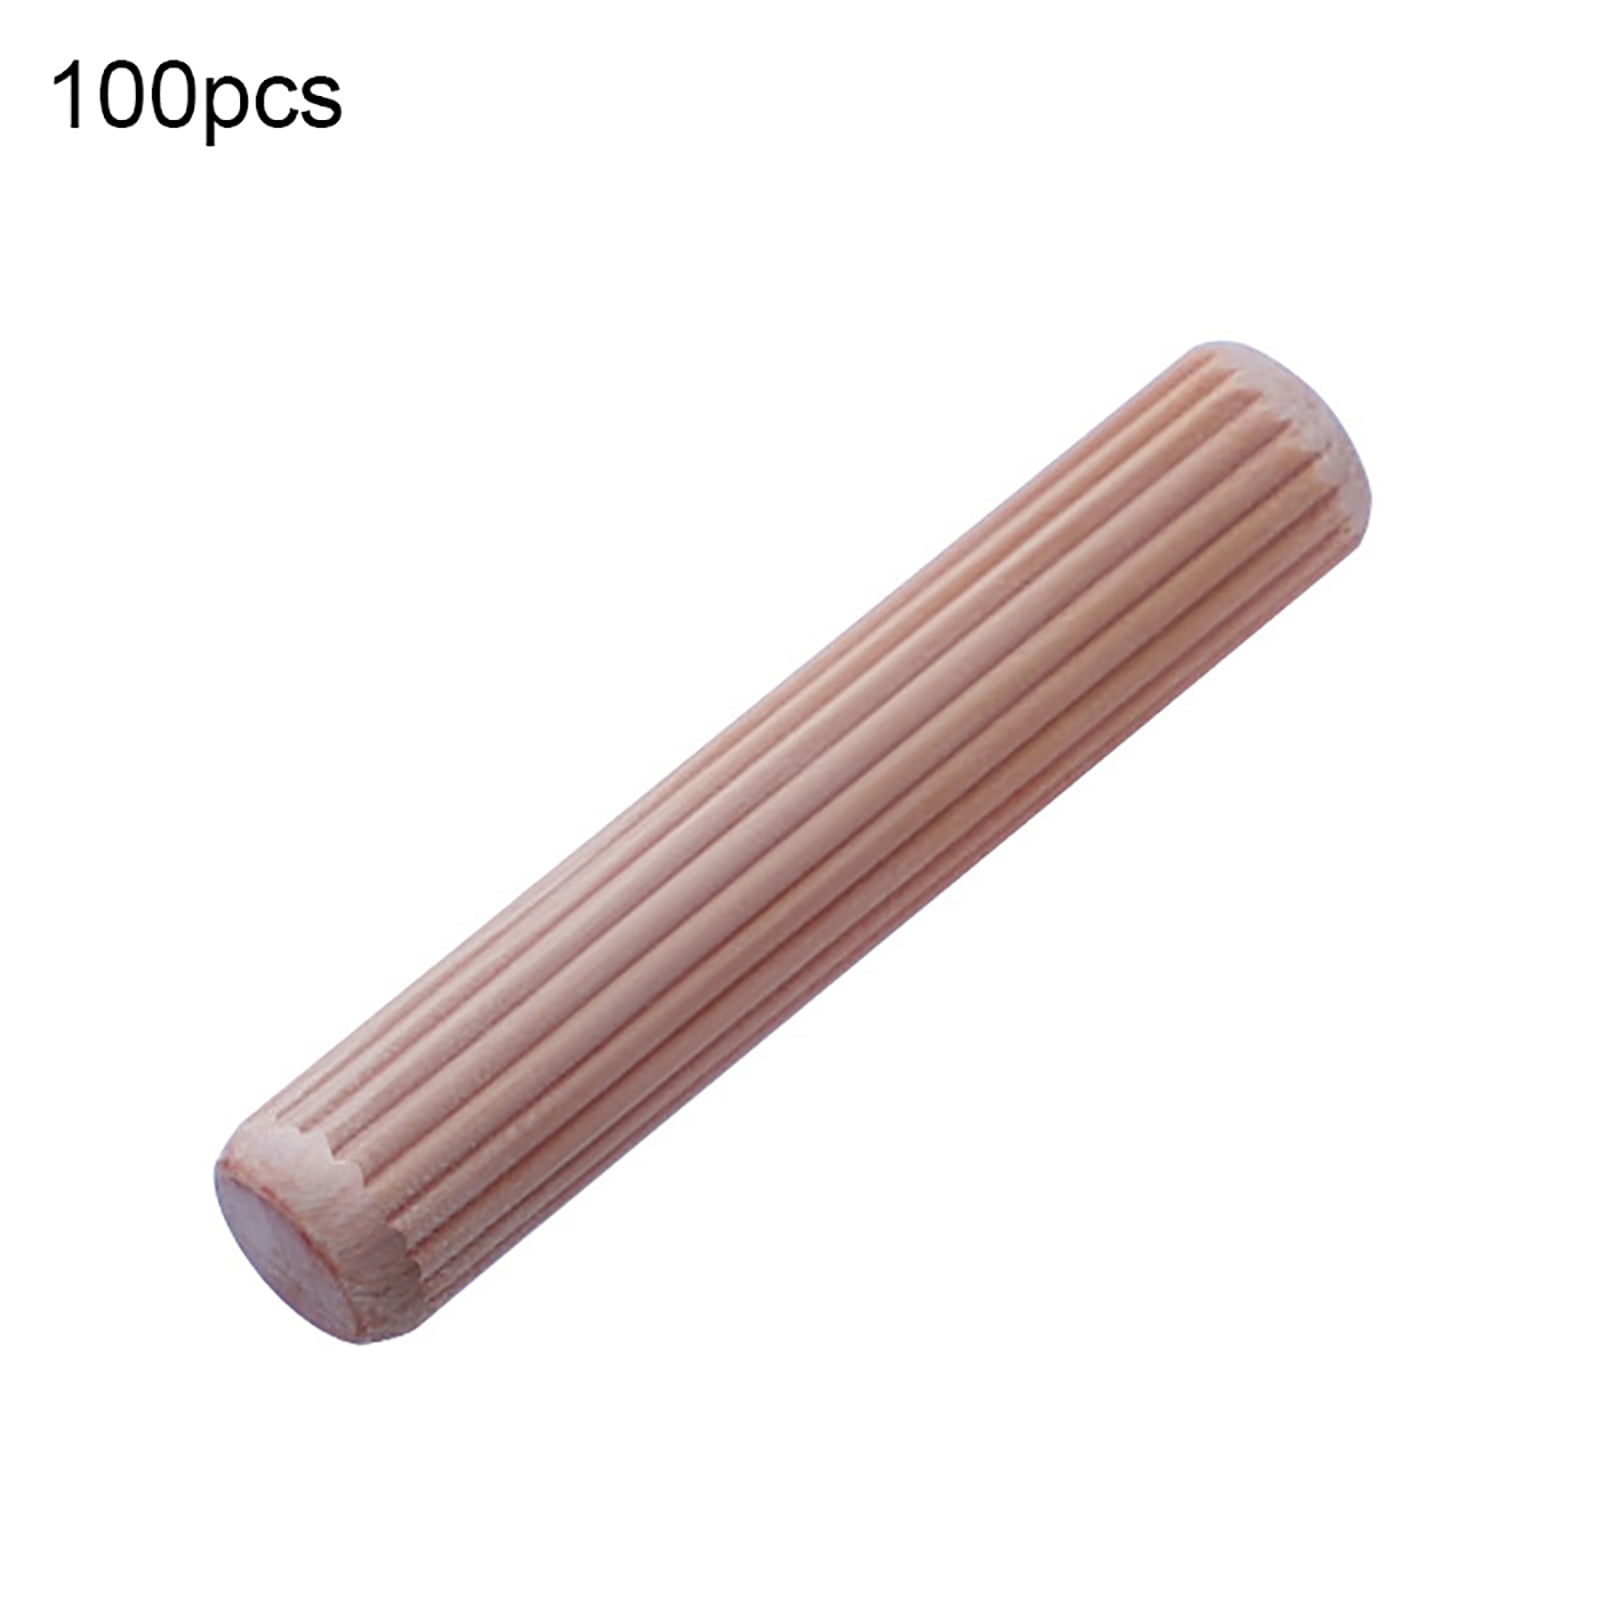 Bag of 100 crafting carpentry wood working wooden dowel pins 6MM X 30 MM 